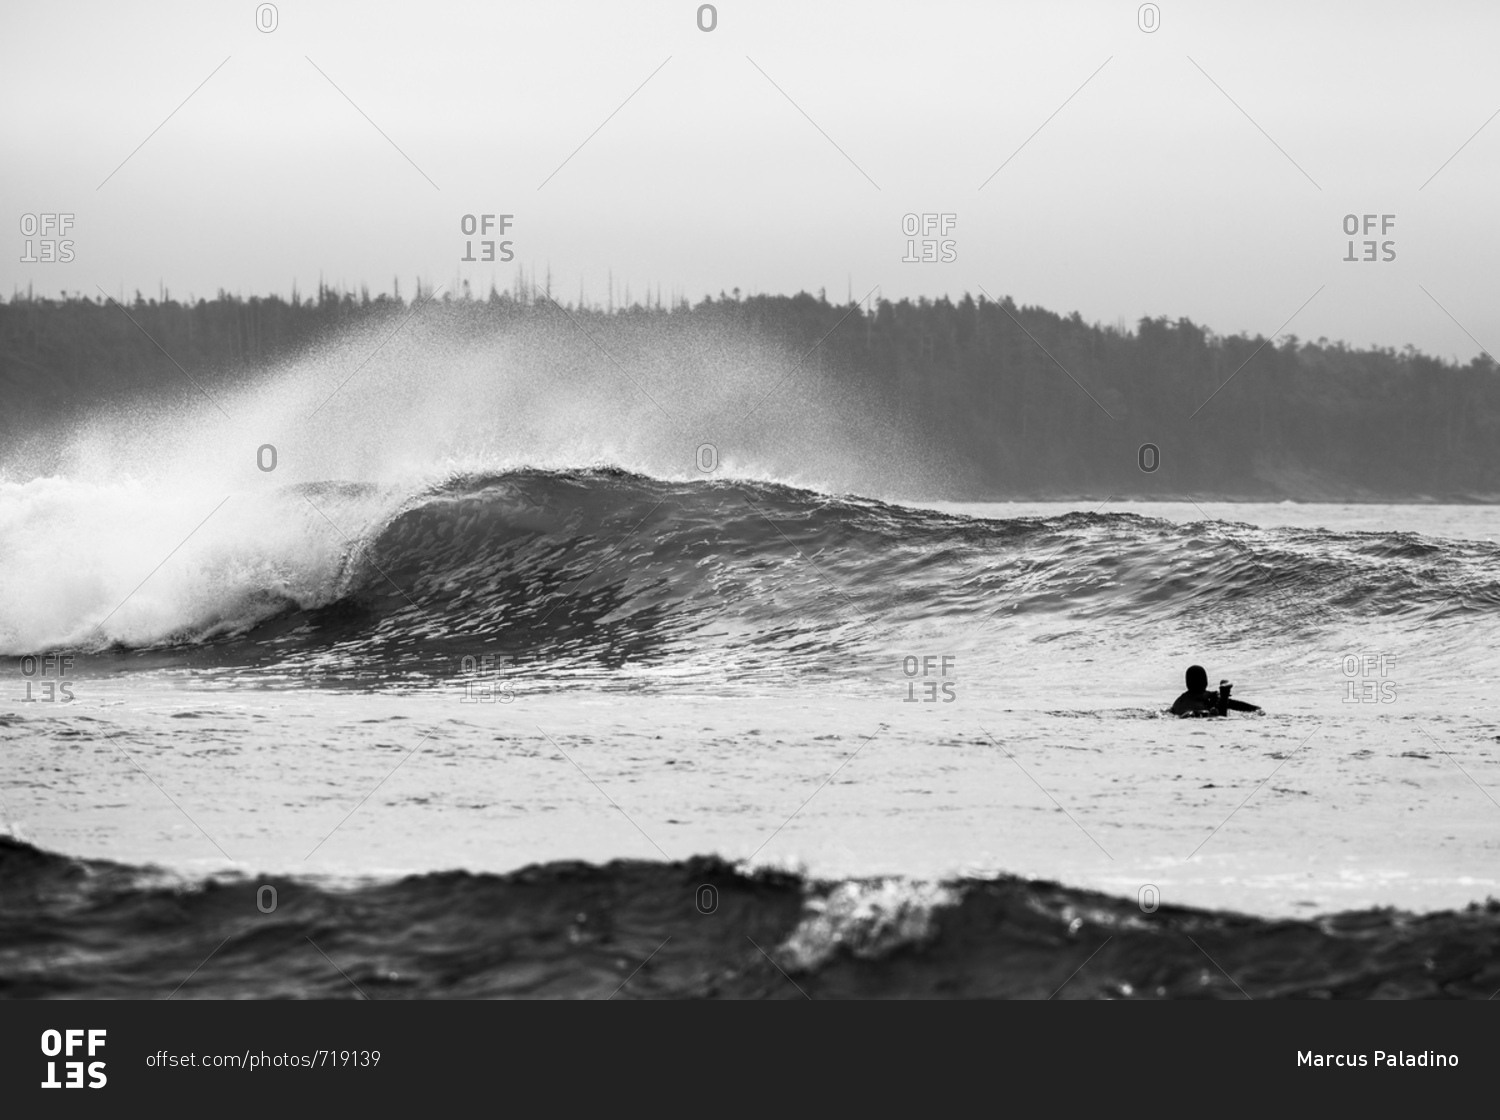 Surfer in water waiting for approaching large wave